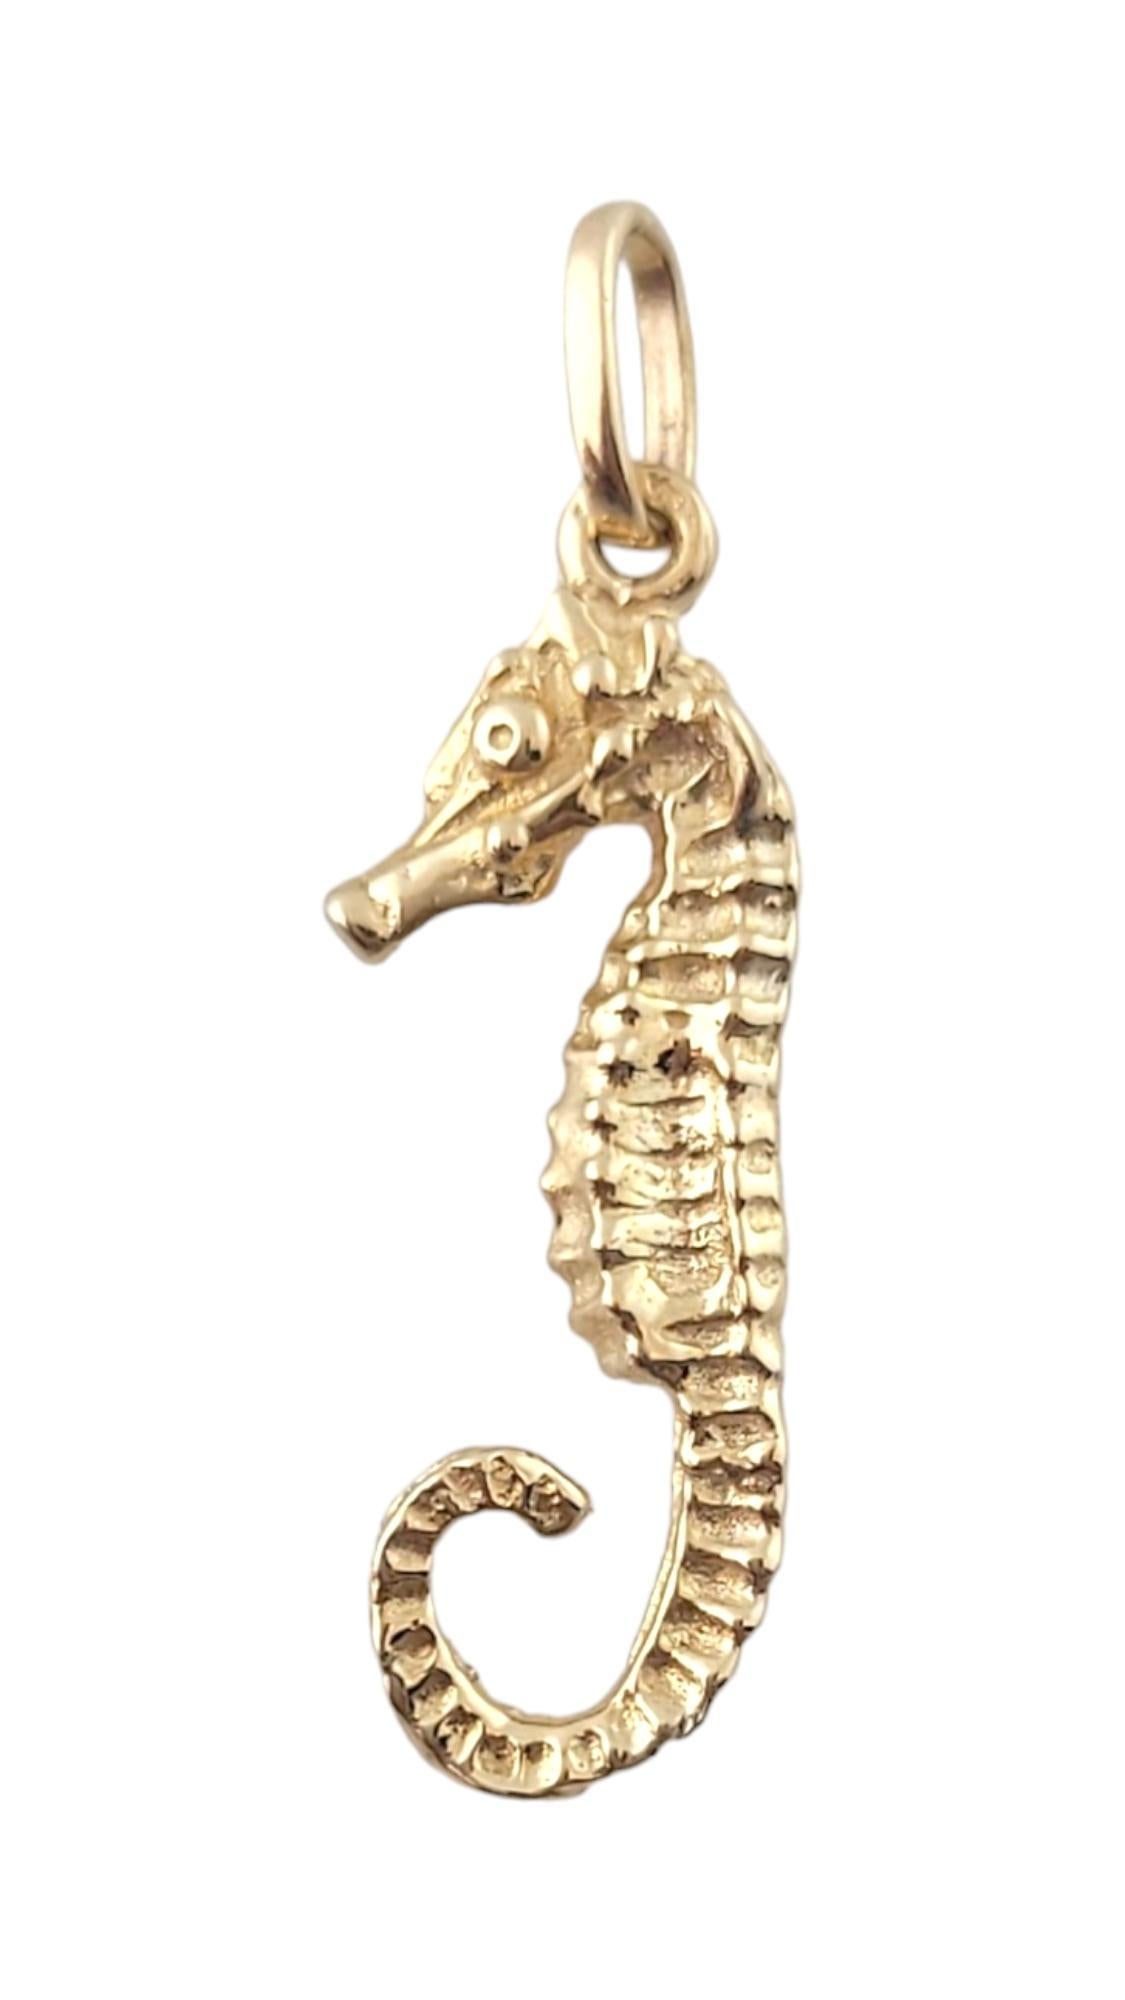 Women's 14K Yellow Gold Seahorse Charm #16357 For Sale